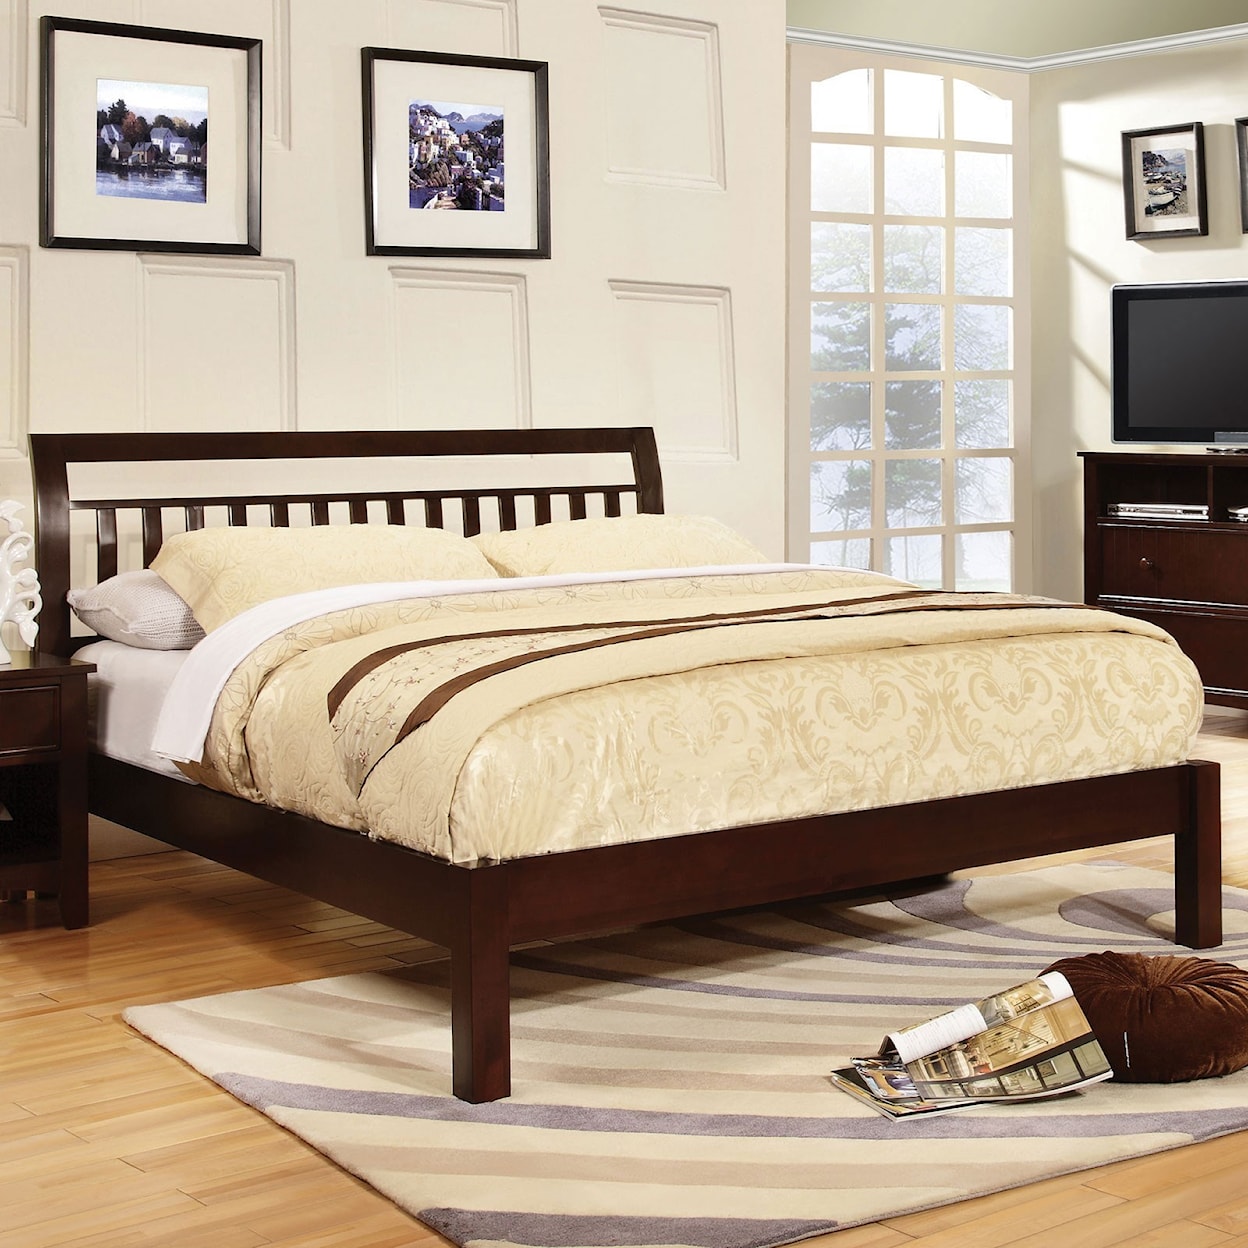 Furniture of America Corry Full Sleigh Bed